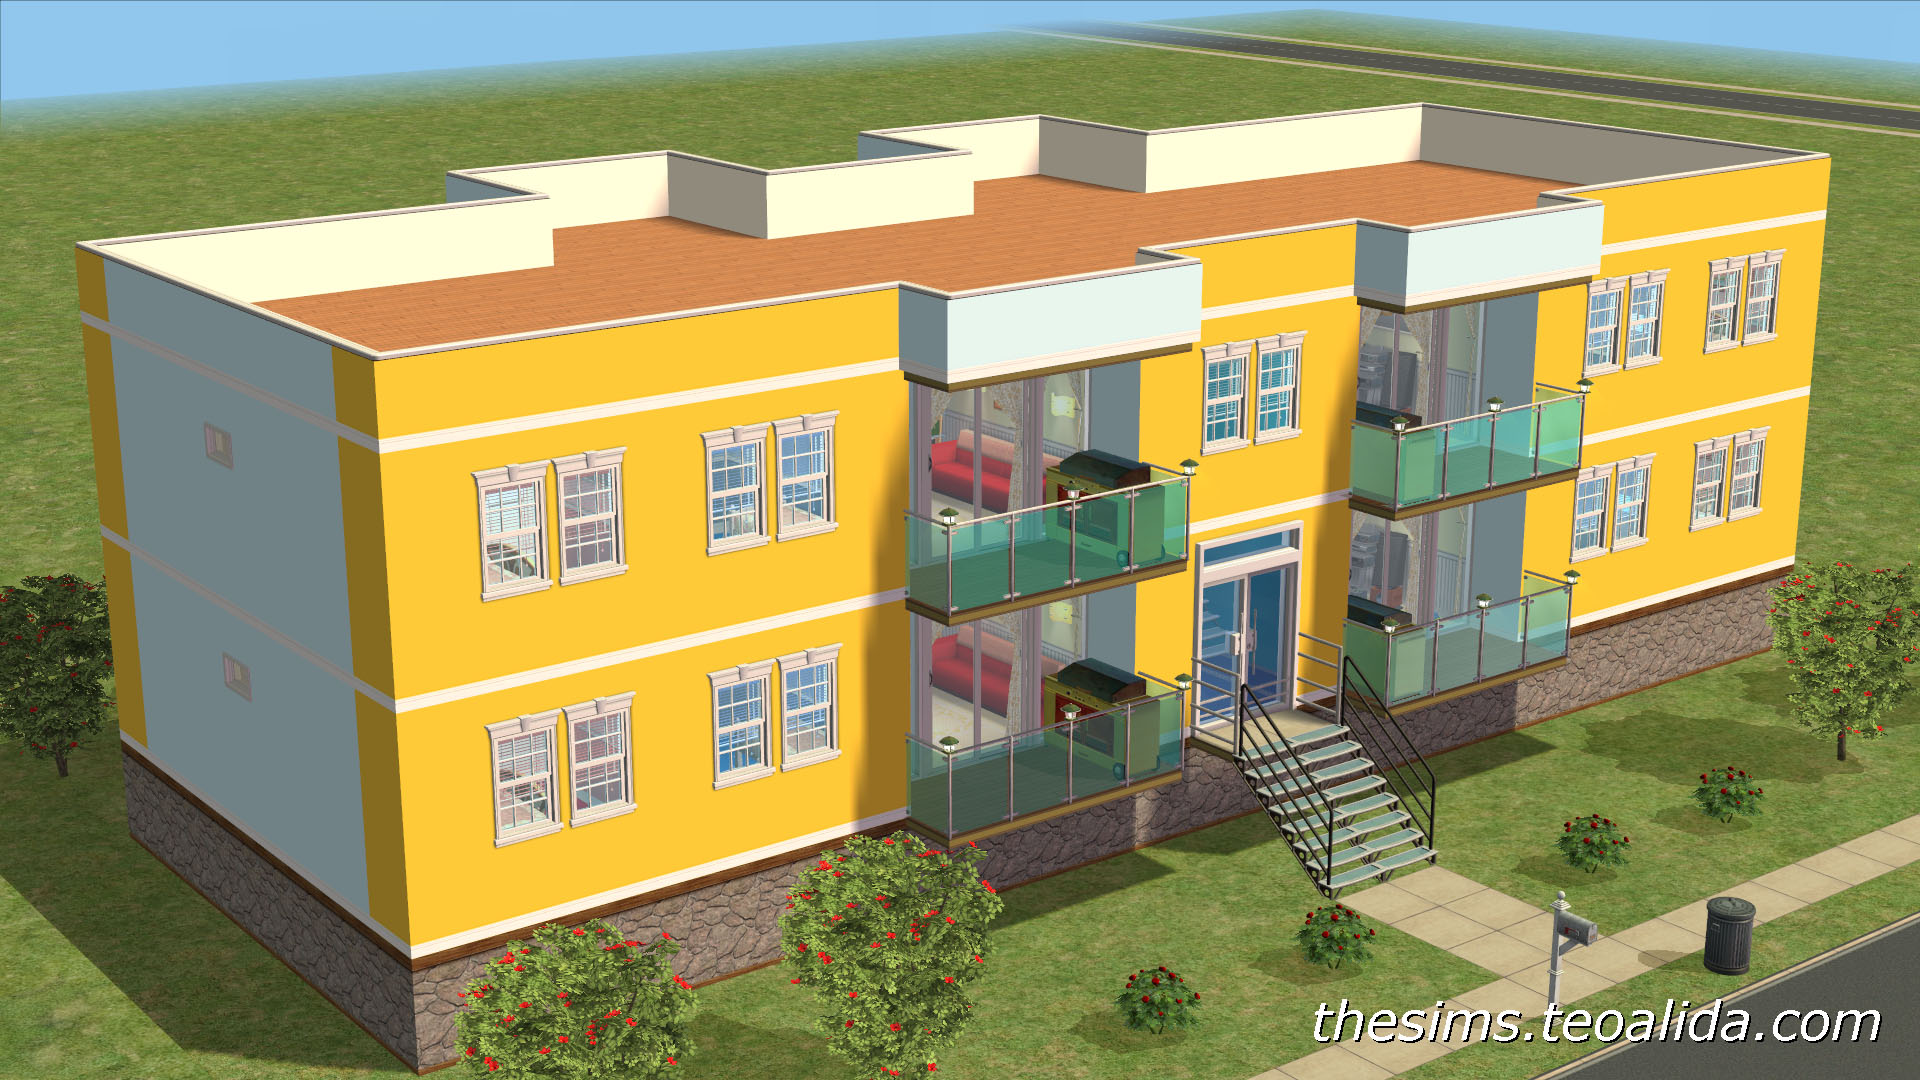 Realistic Apartment Block With 3 Bedroom Flats The Sims Fan